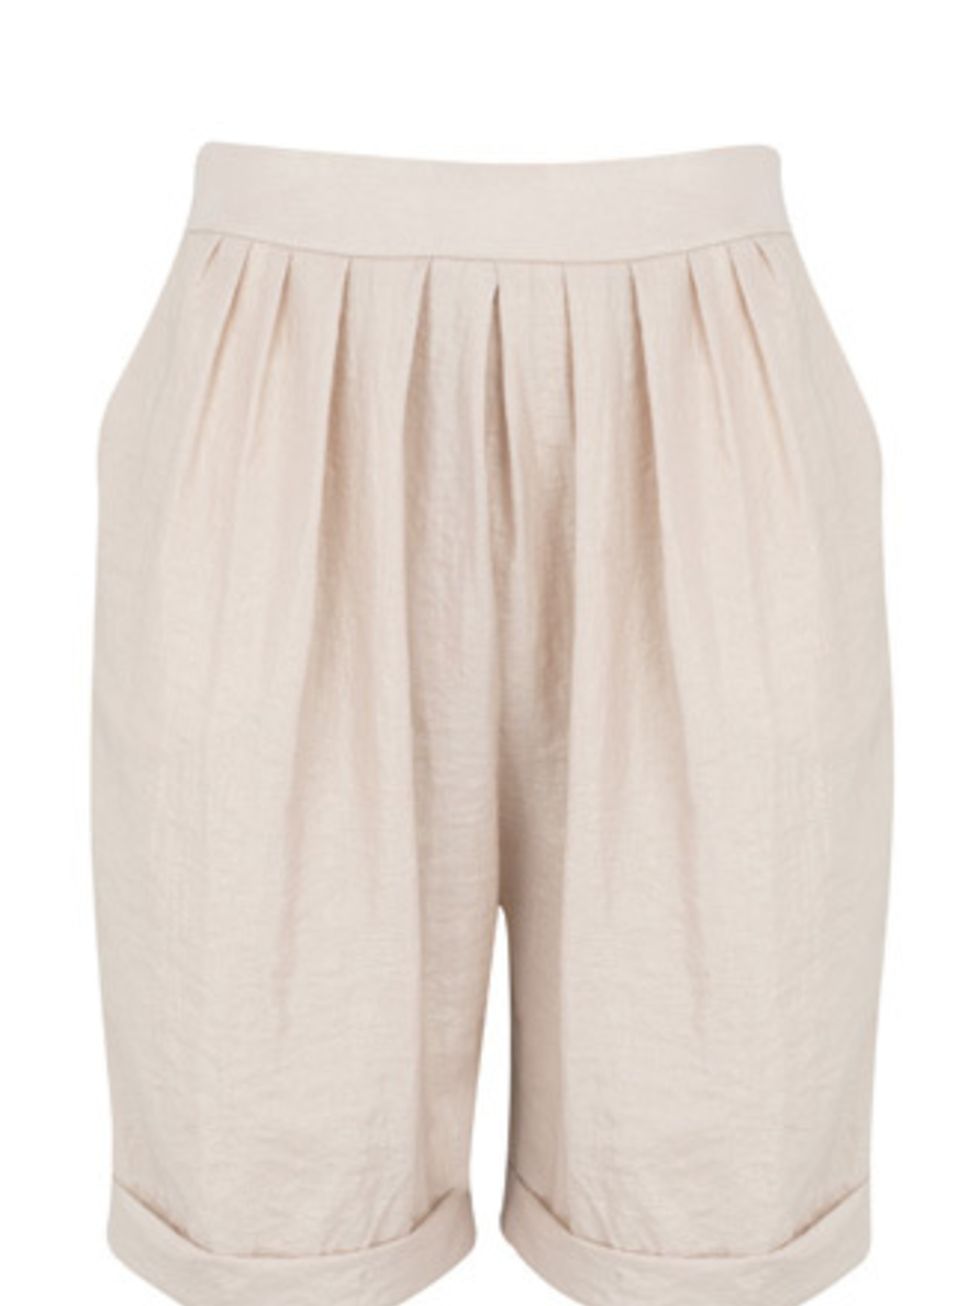 <p>These shorts are so classic and chic that they will last for seasons to come. A good investment buy.Shorts, £105 by Maje at <a href="http://www.fenwick.co.uk/">Fenwick</a></p>